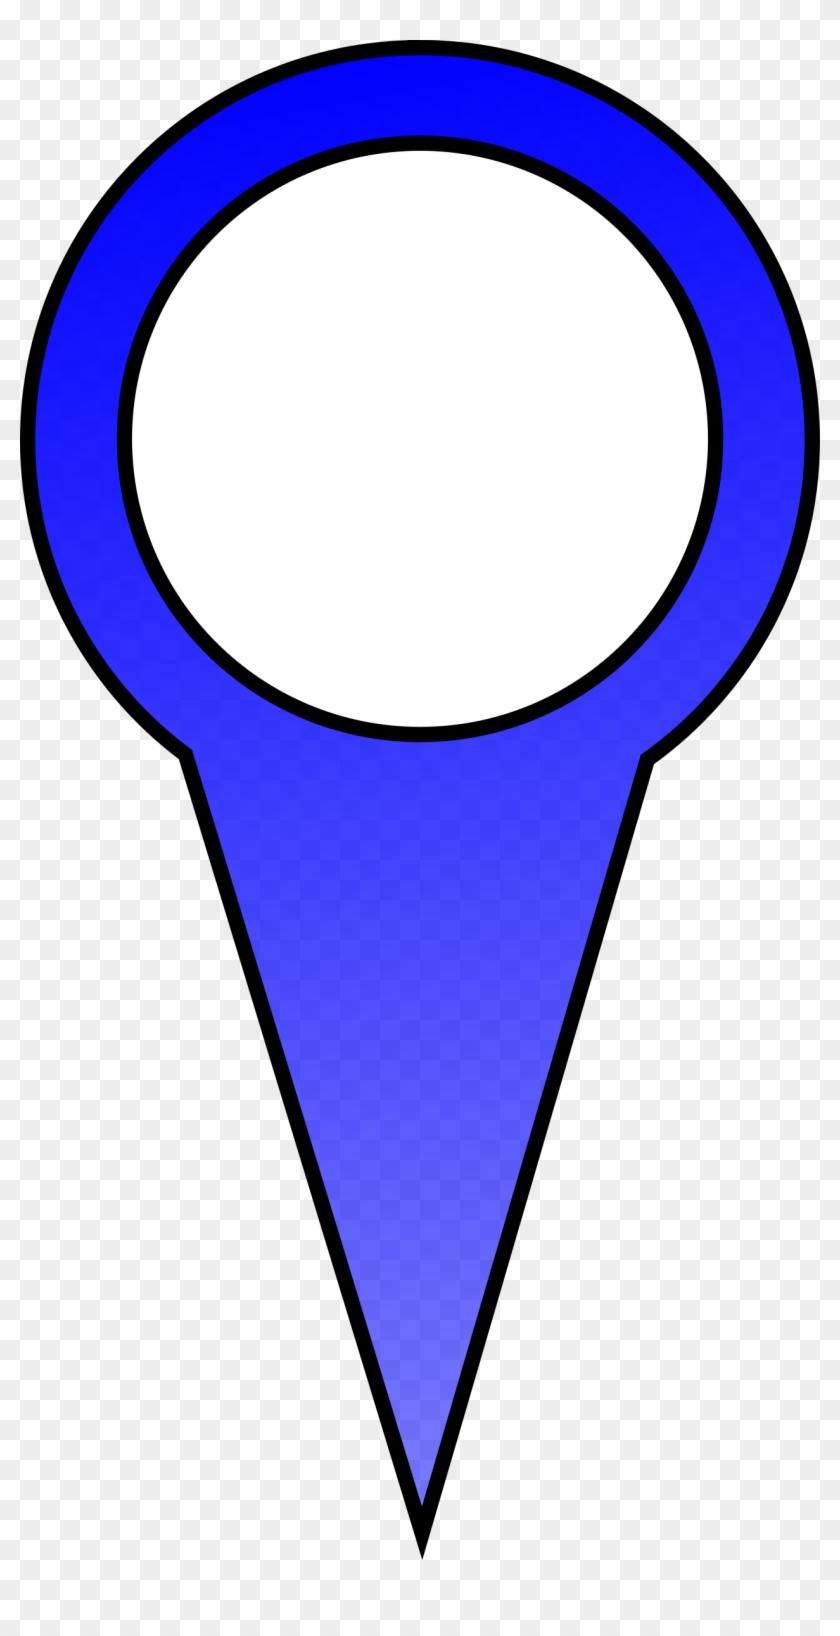 Free Blue Map Pin - Map Pins Clipart #260874